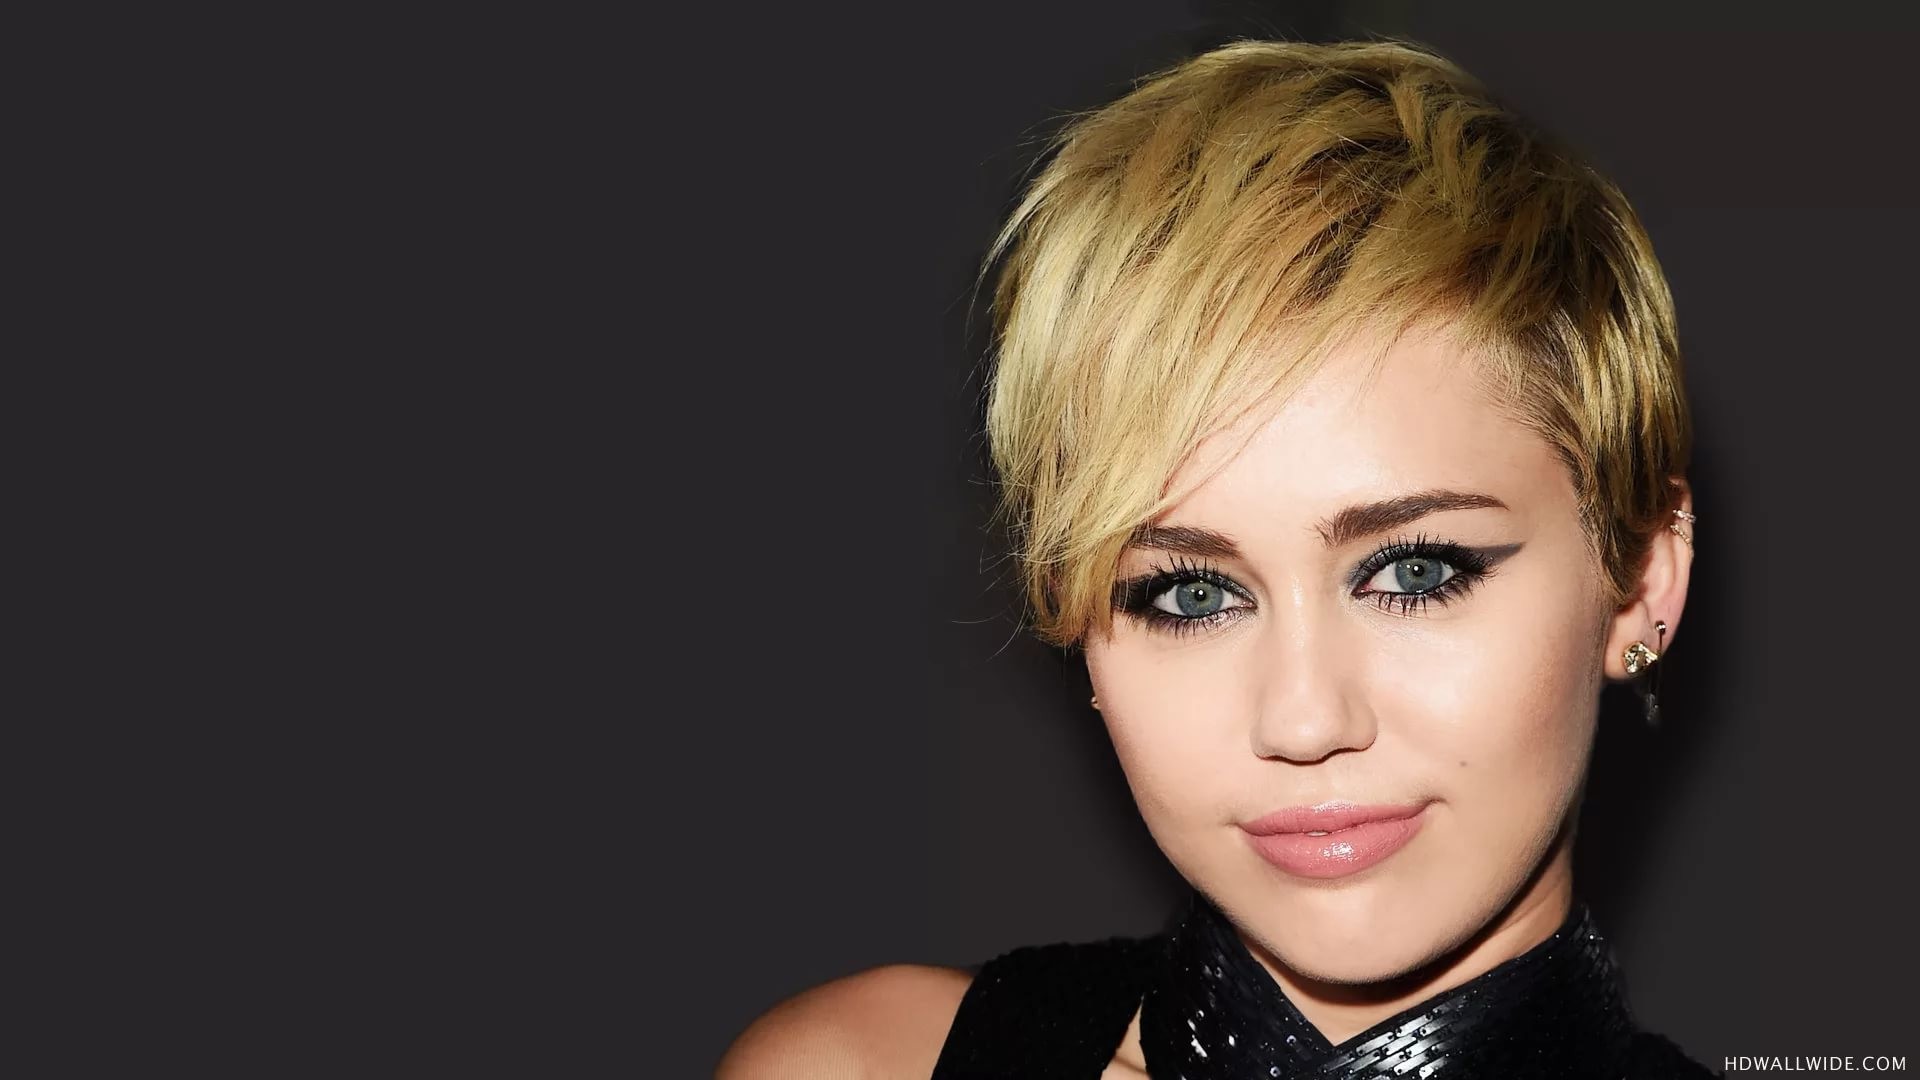 1920x1080 ... Miley Cyrus Wallpapers and Backgrounds ...